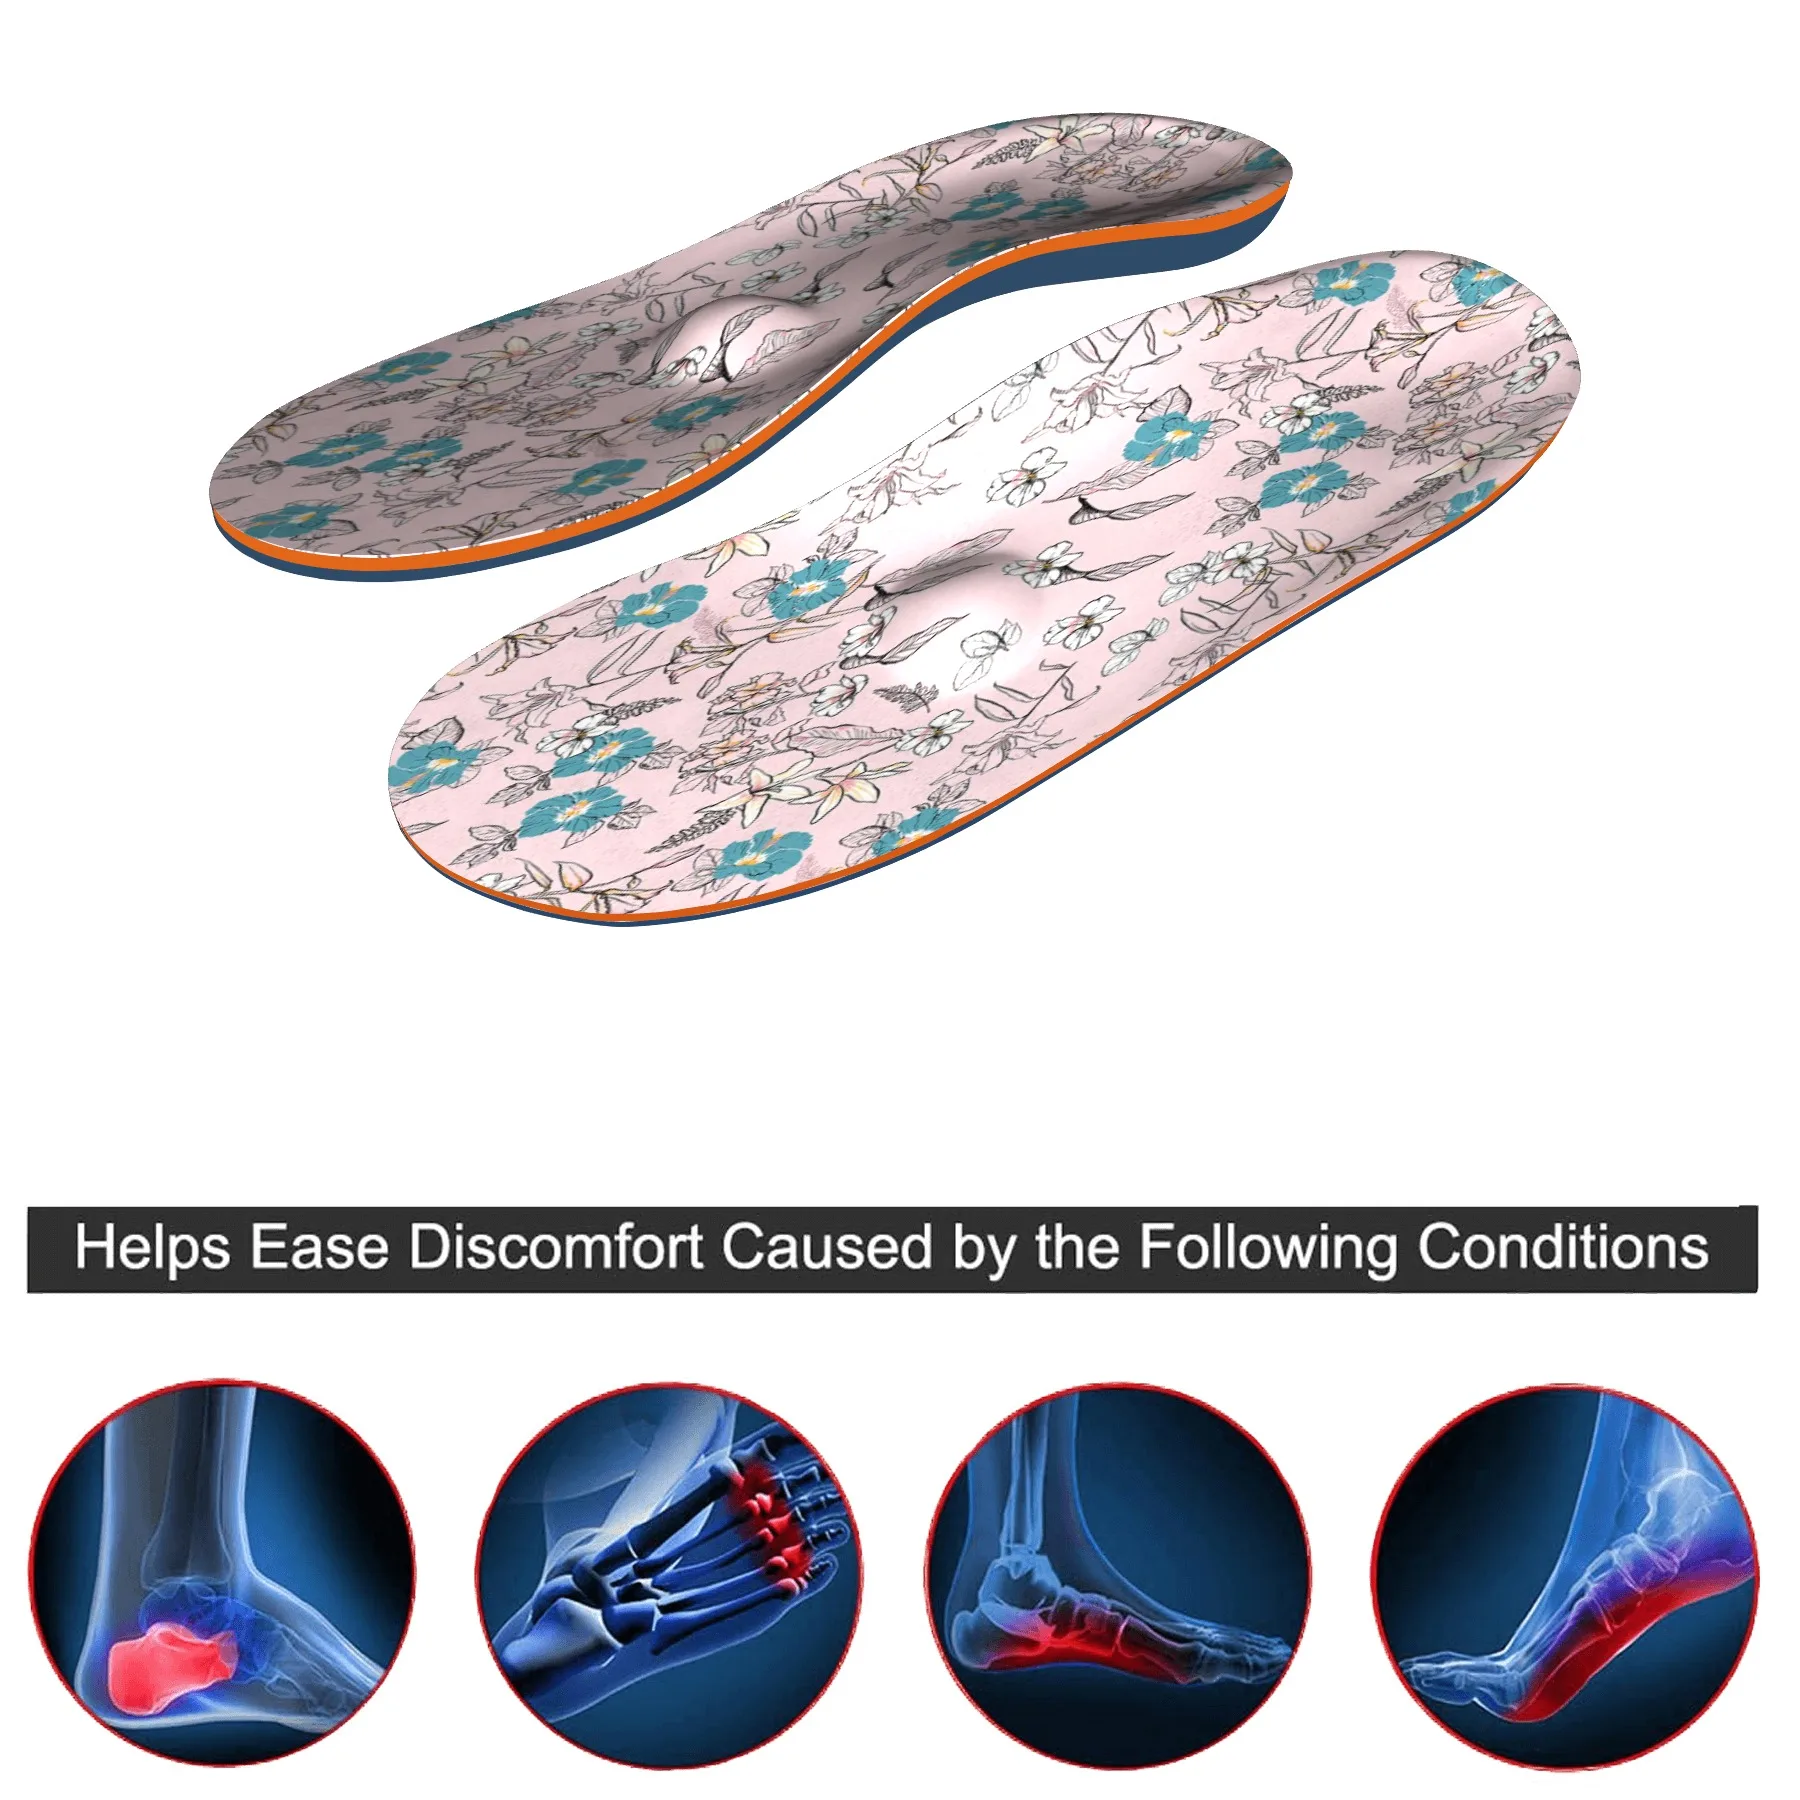 Flat Feet Arch Support Orthopedic Insoles,Relieve Foot Pressure and Fatigue,Plantar Fasciitis Orthotic Insoles Men Women